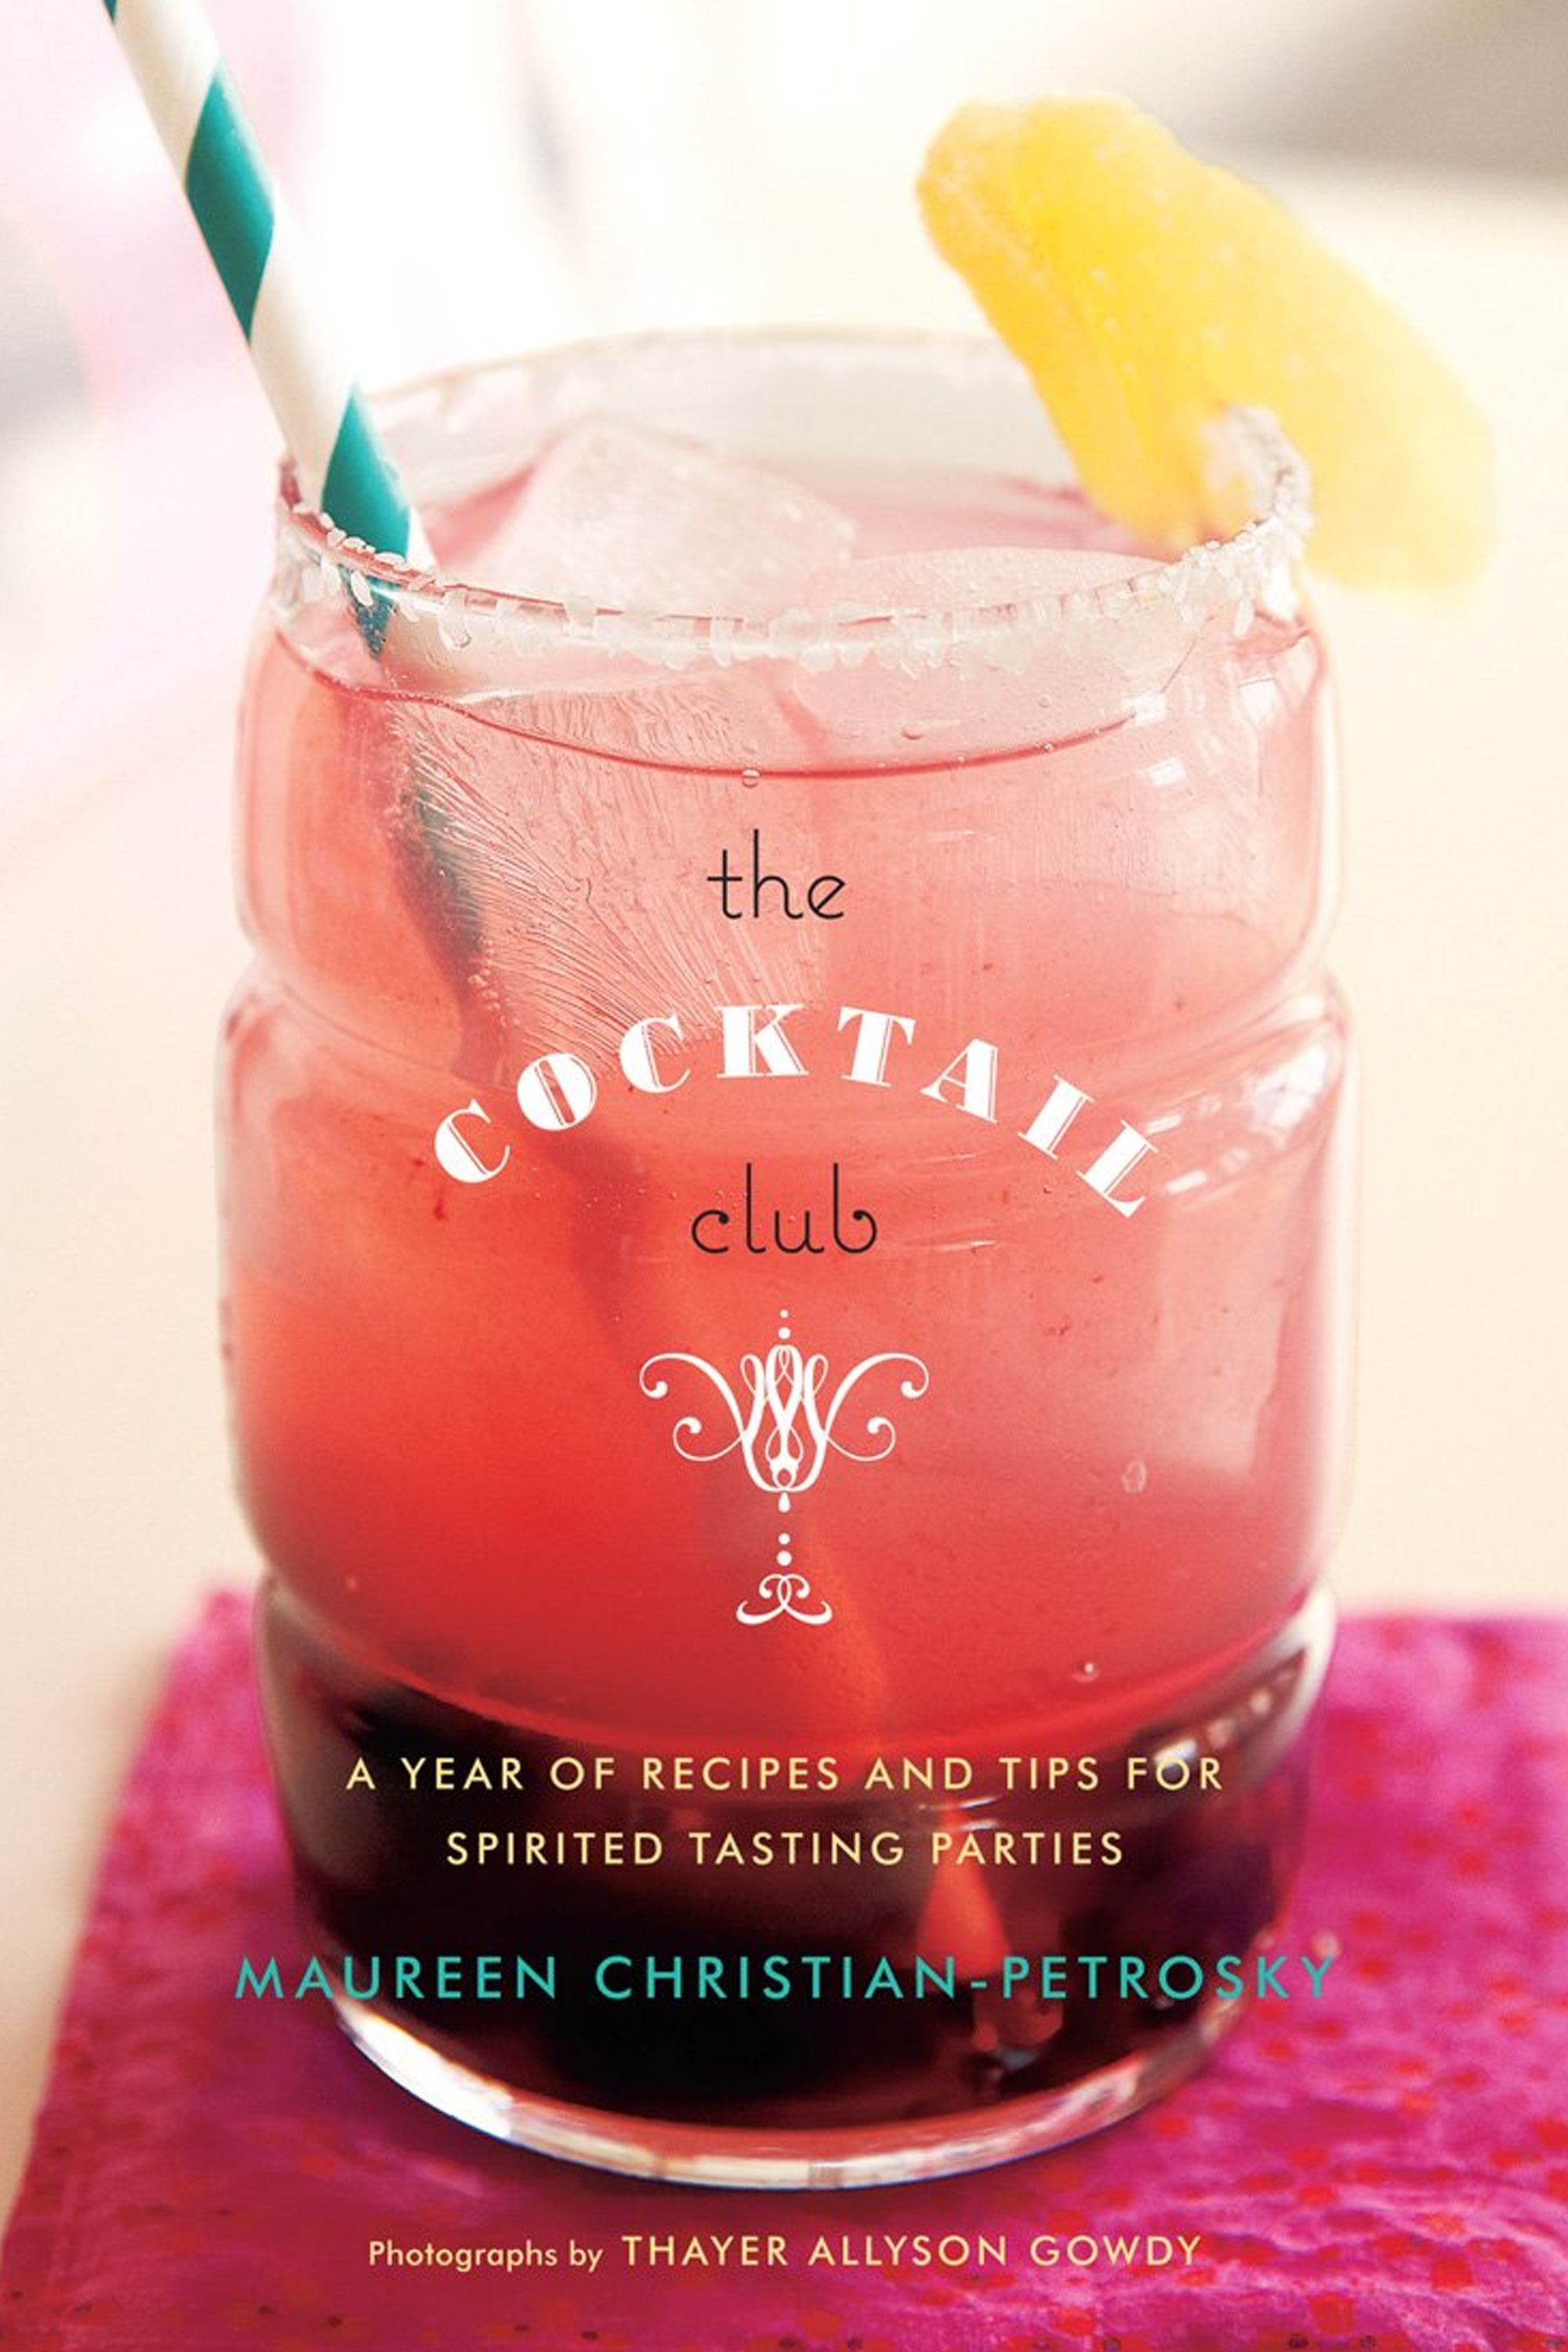 The Cocktail Club by Maureen Christian-Petrosky